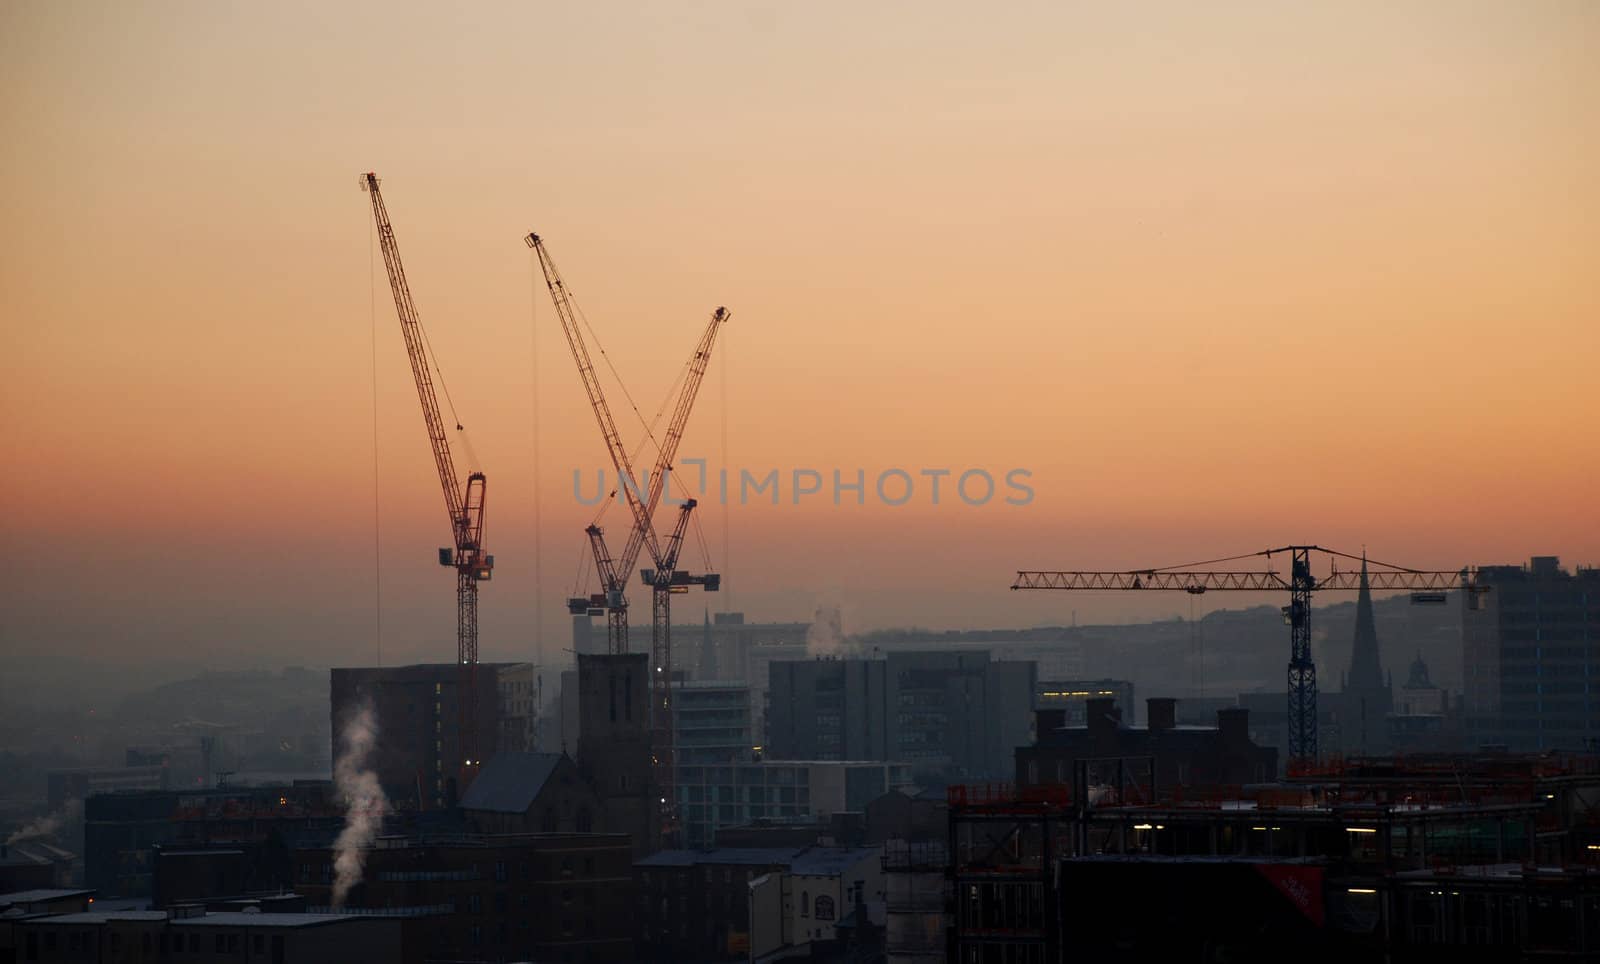 City of Cranes by pwillitts